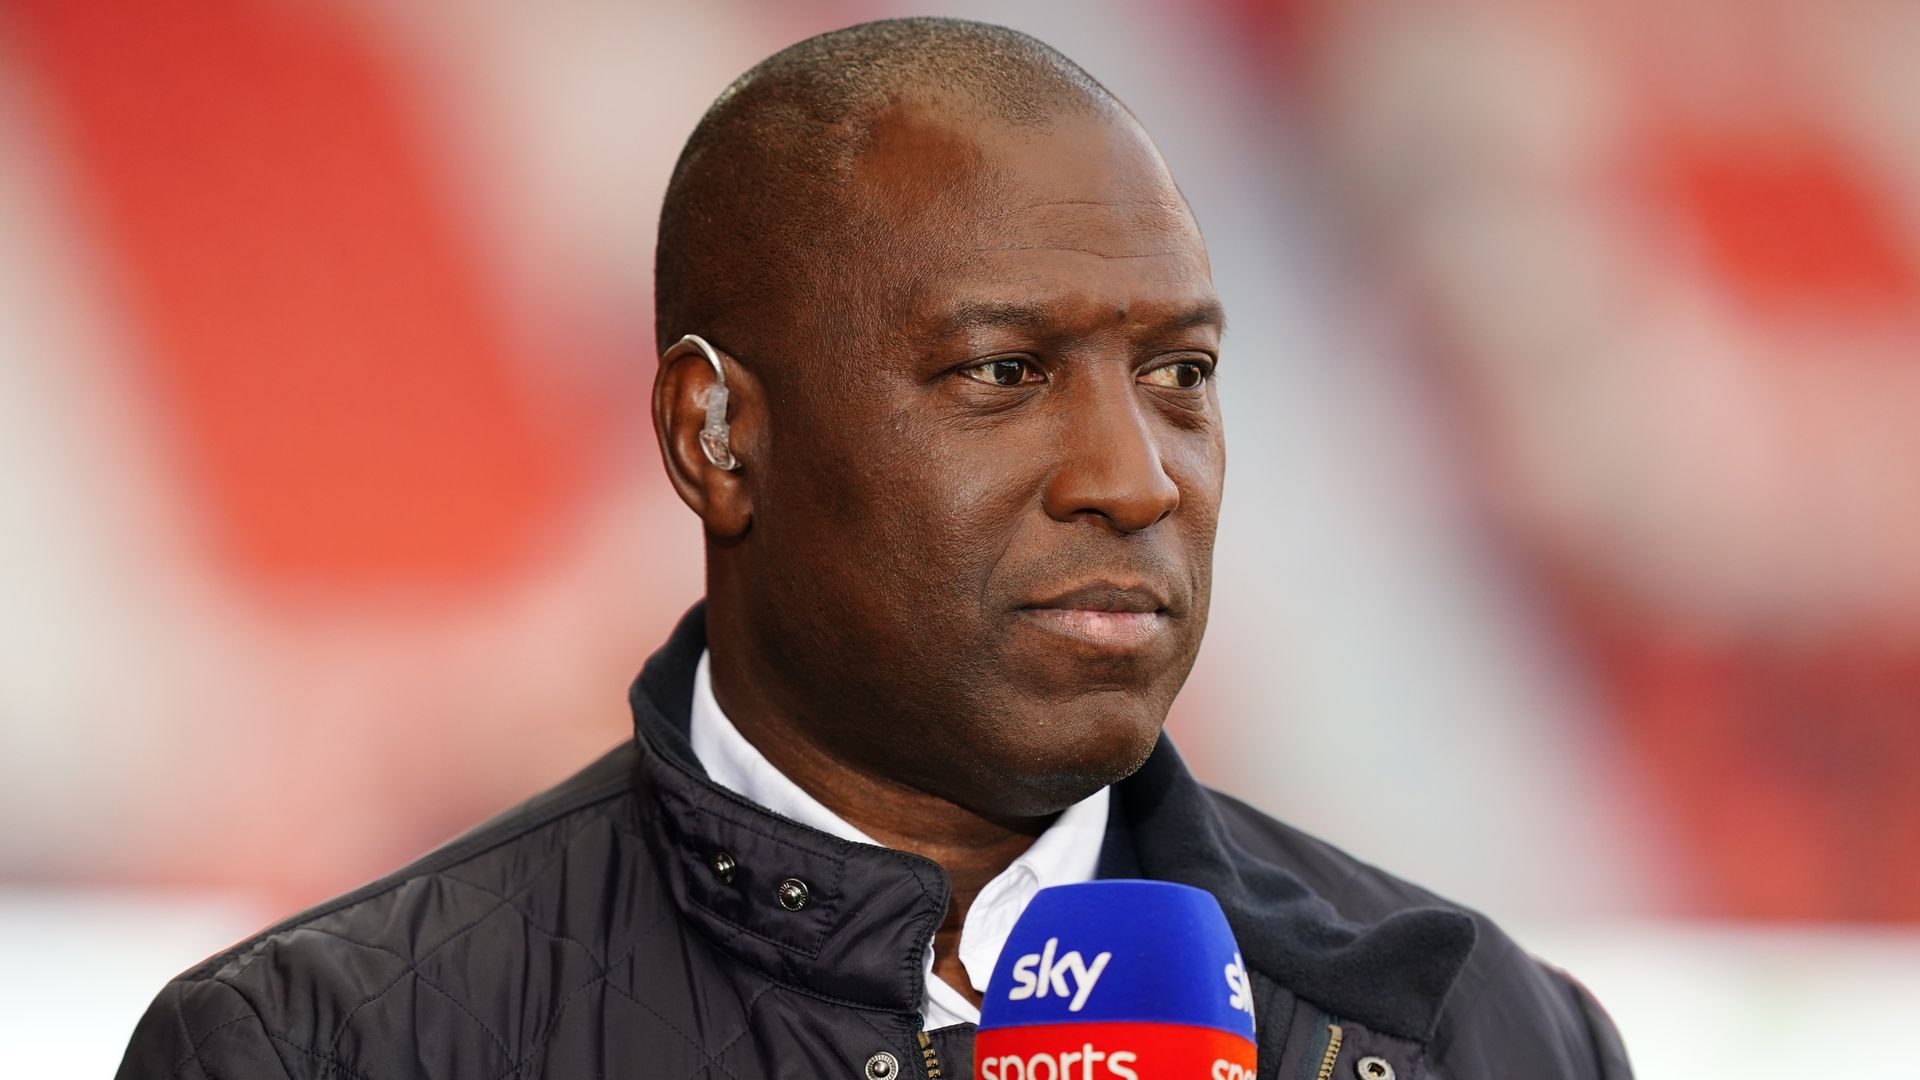 Concerns raised over ex-footballer Kevin Campbell's hospital care before his death, inquest told